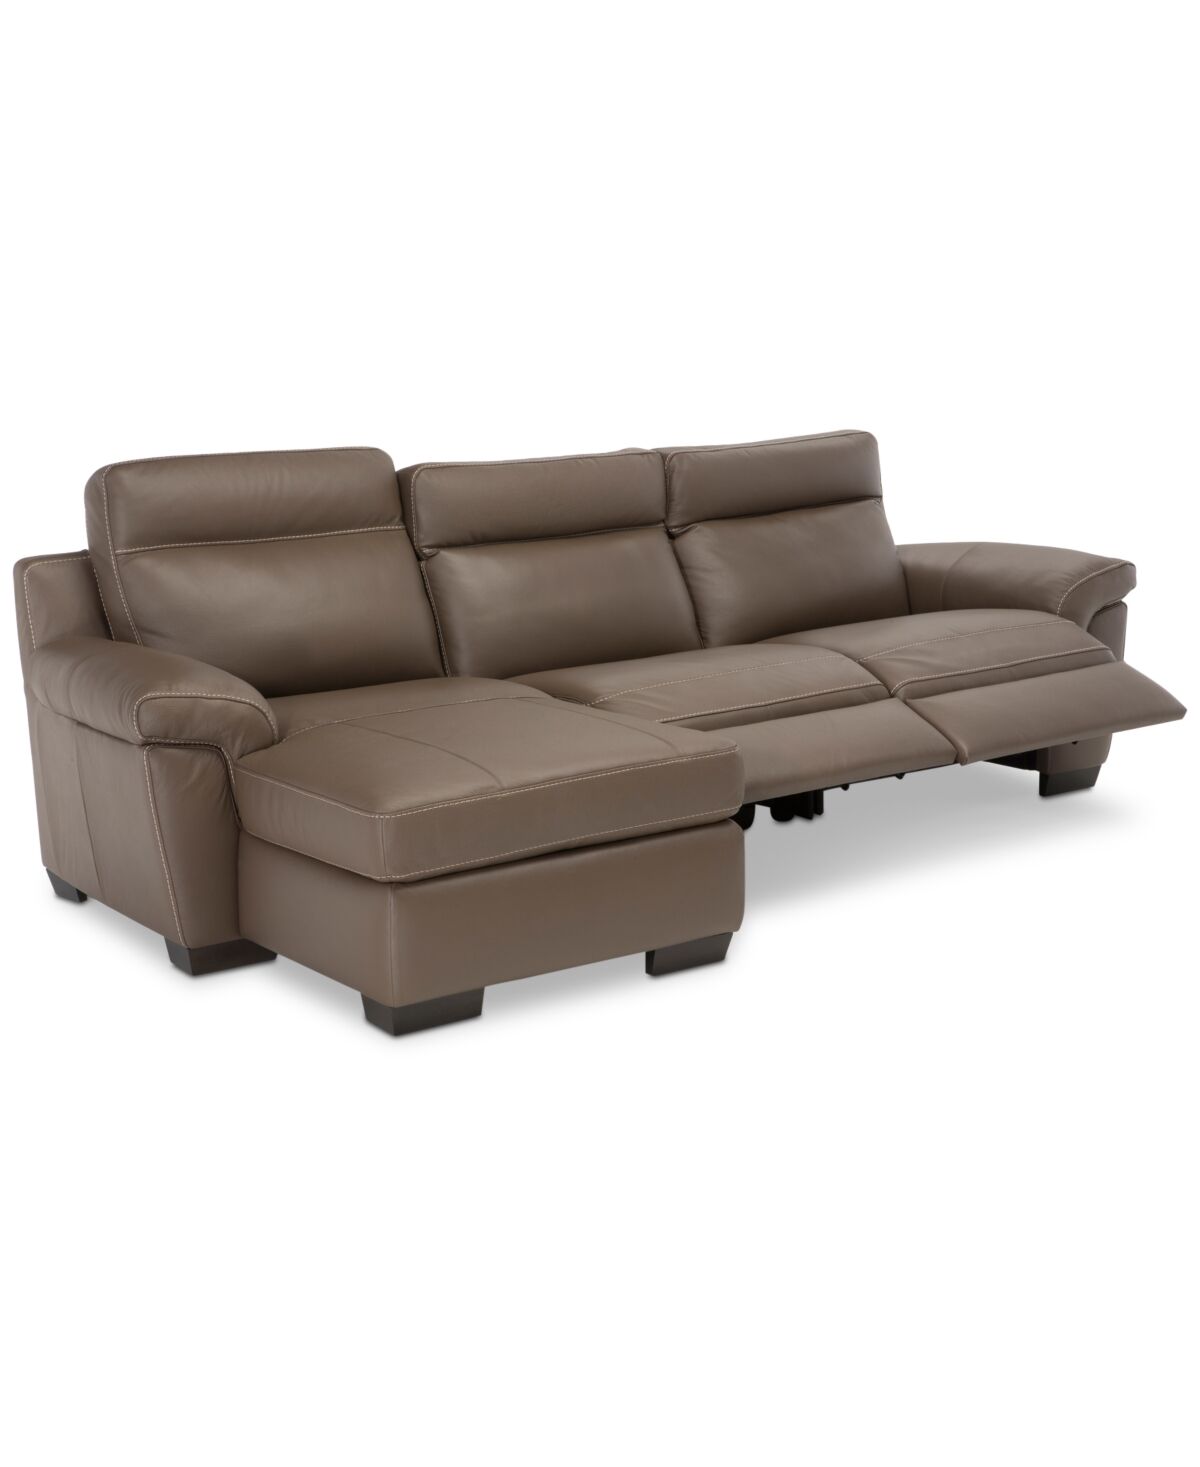 Furniture Julius Ii 3-Pc. Leather Chaise Sectional Sofa With 2 Power Recliners, Power Headrests And Usb Power Outlet - Dark Taupe